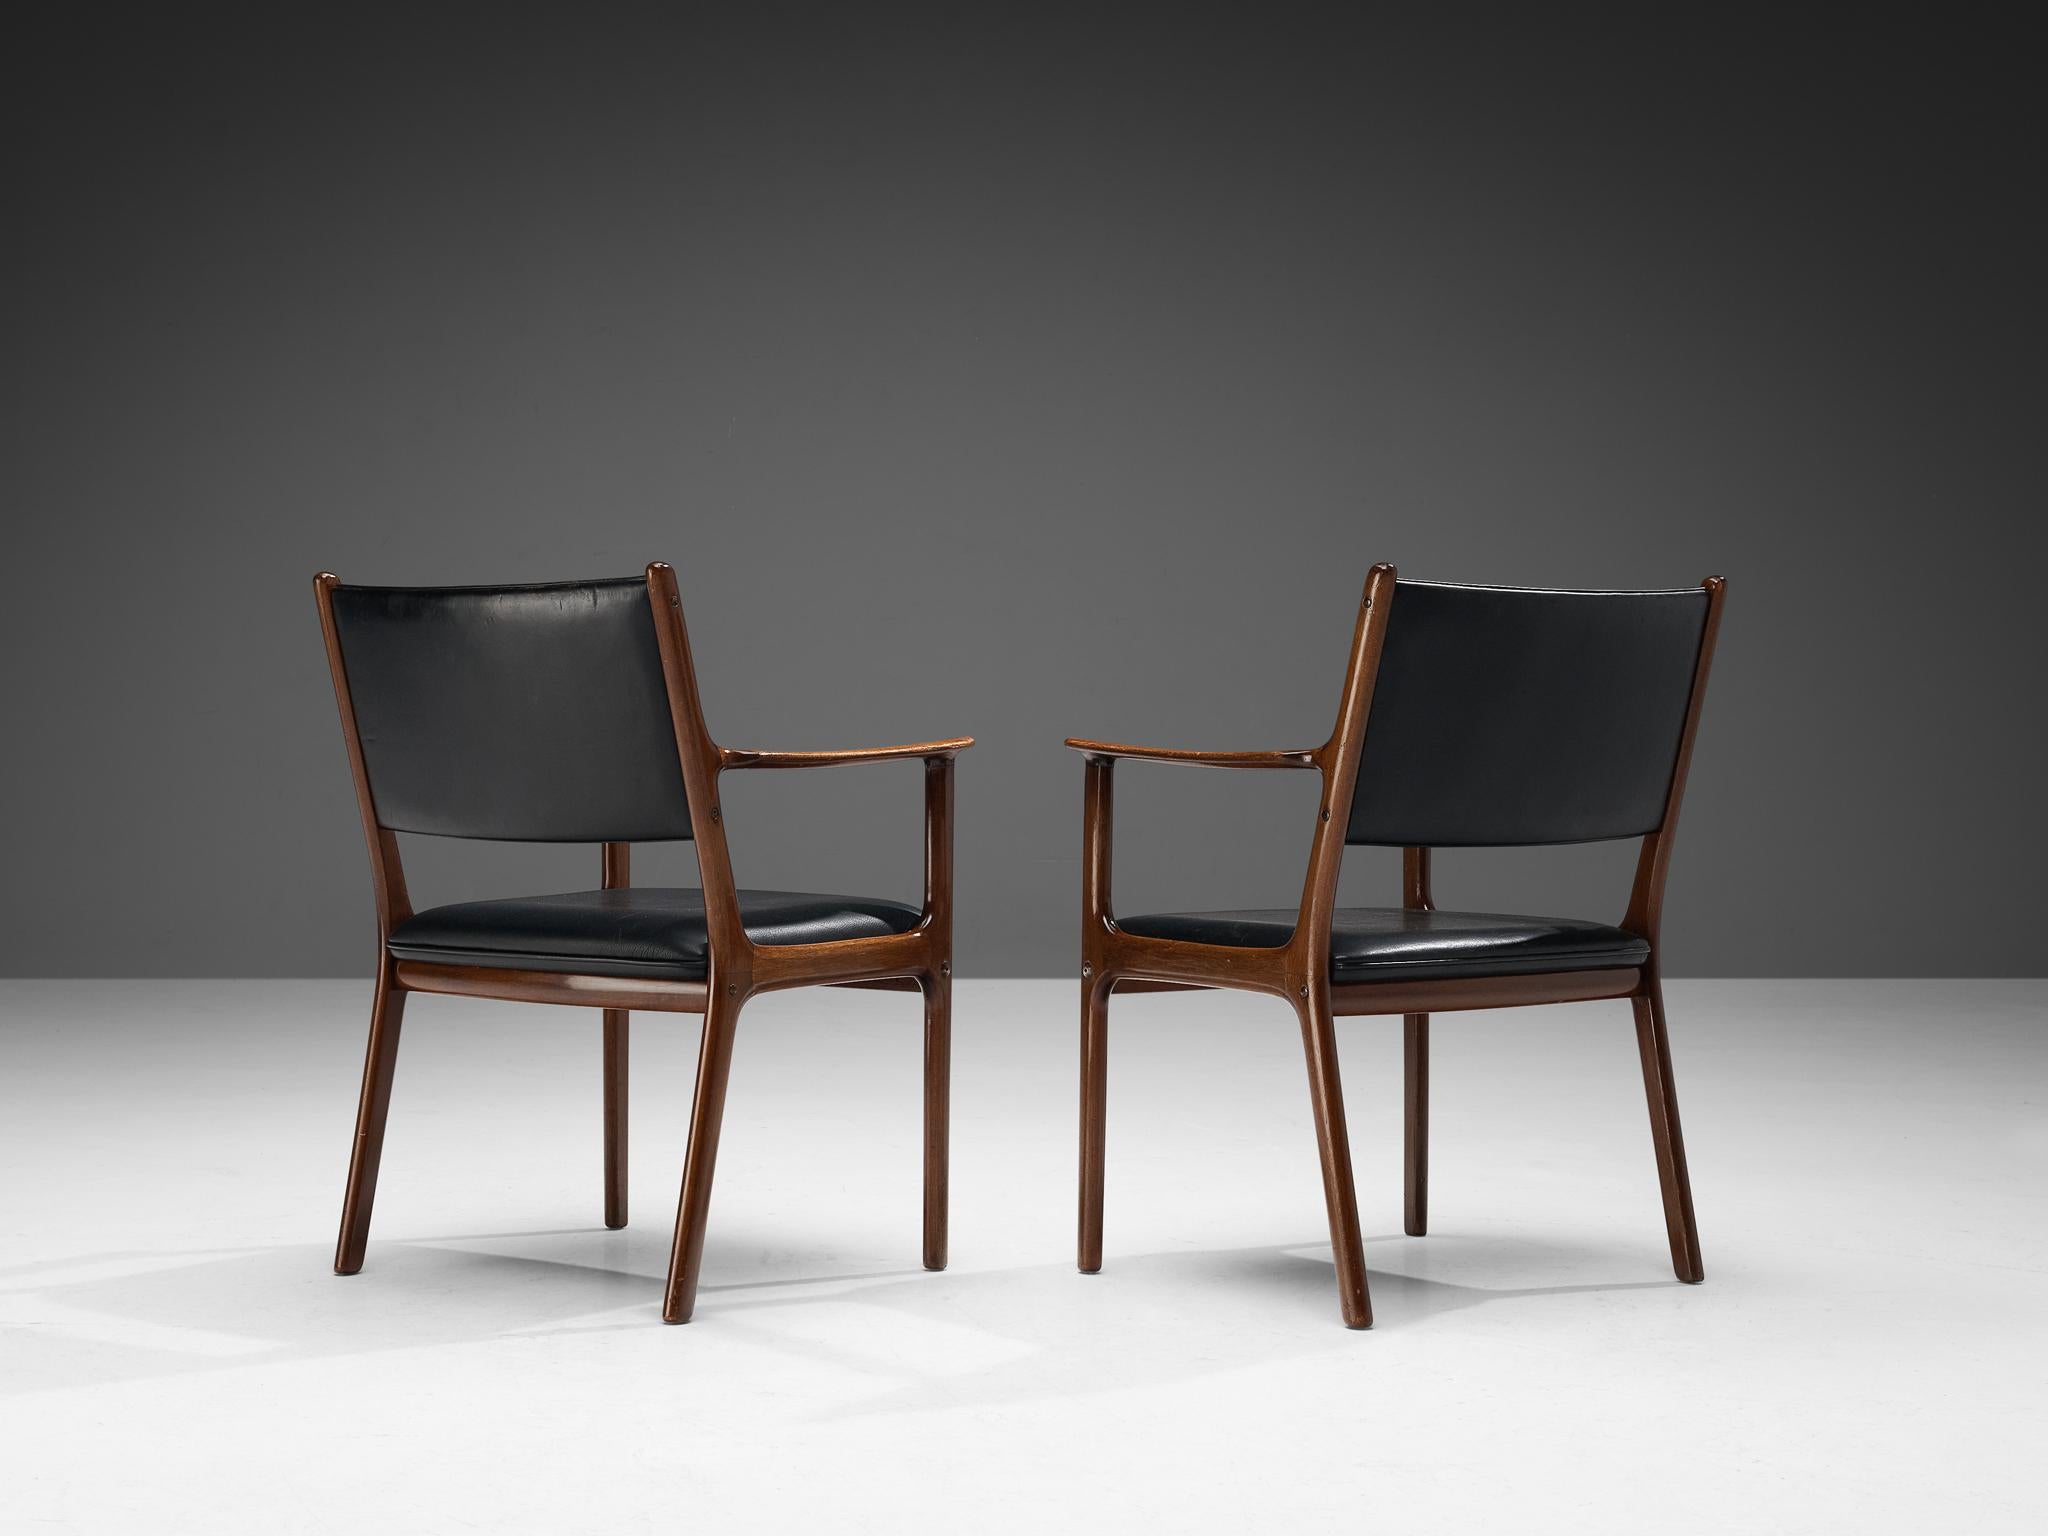 Mid-20th Century Ole Wanscher for Poul Jeppesen Set of Four Armchairs in Teak and Black Leather